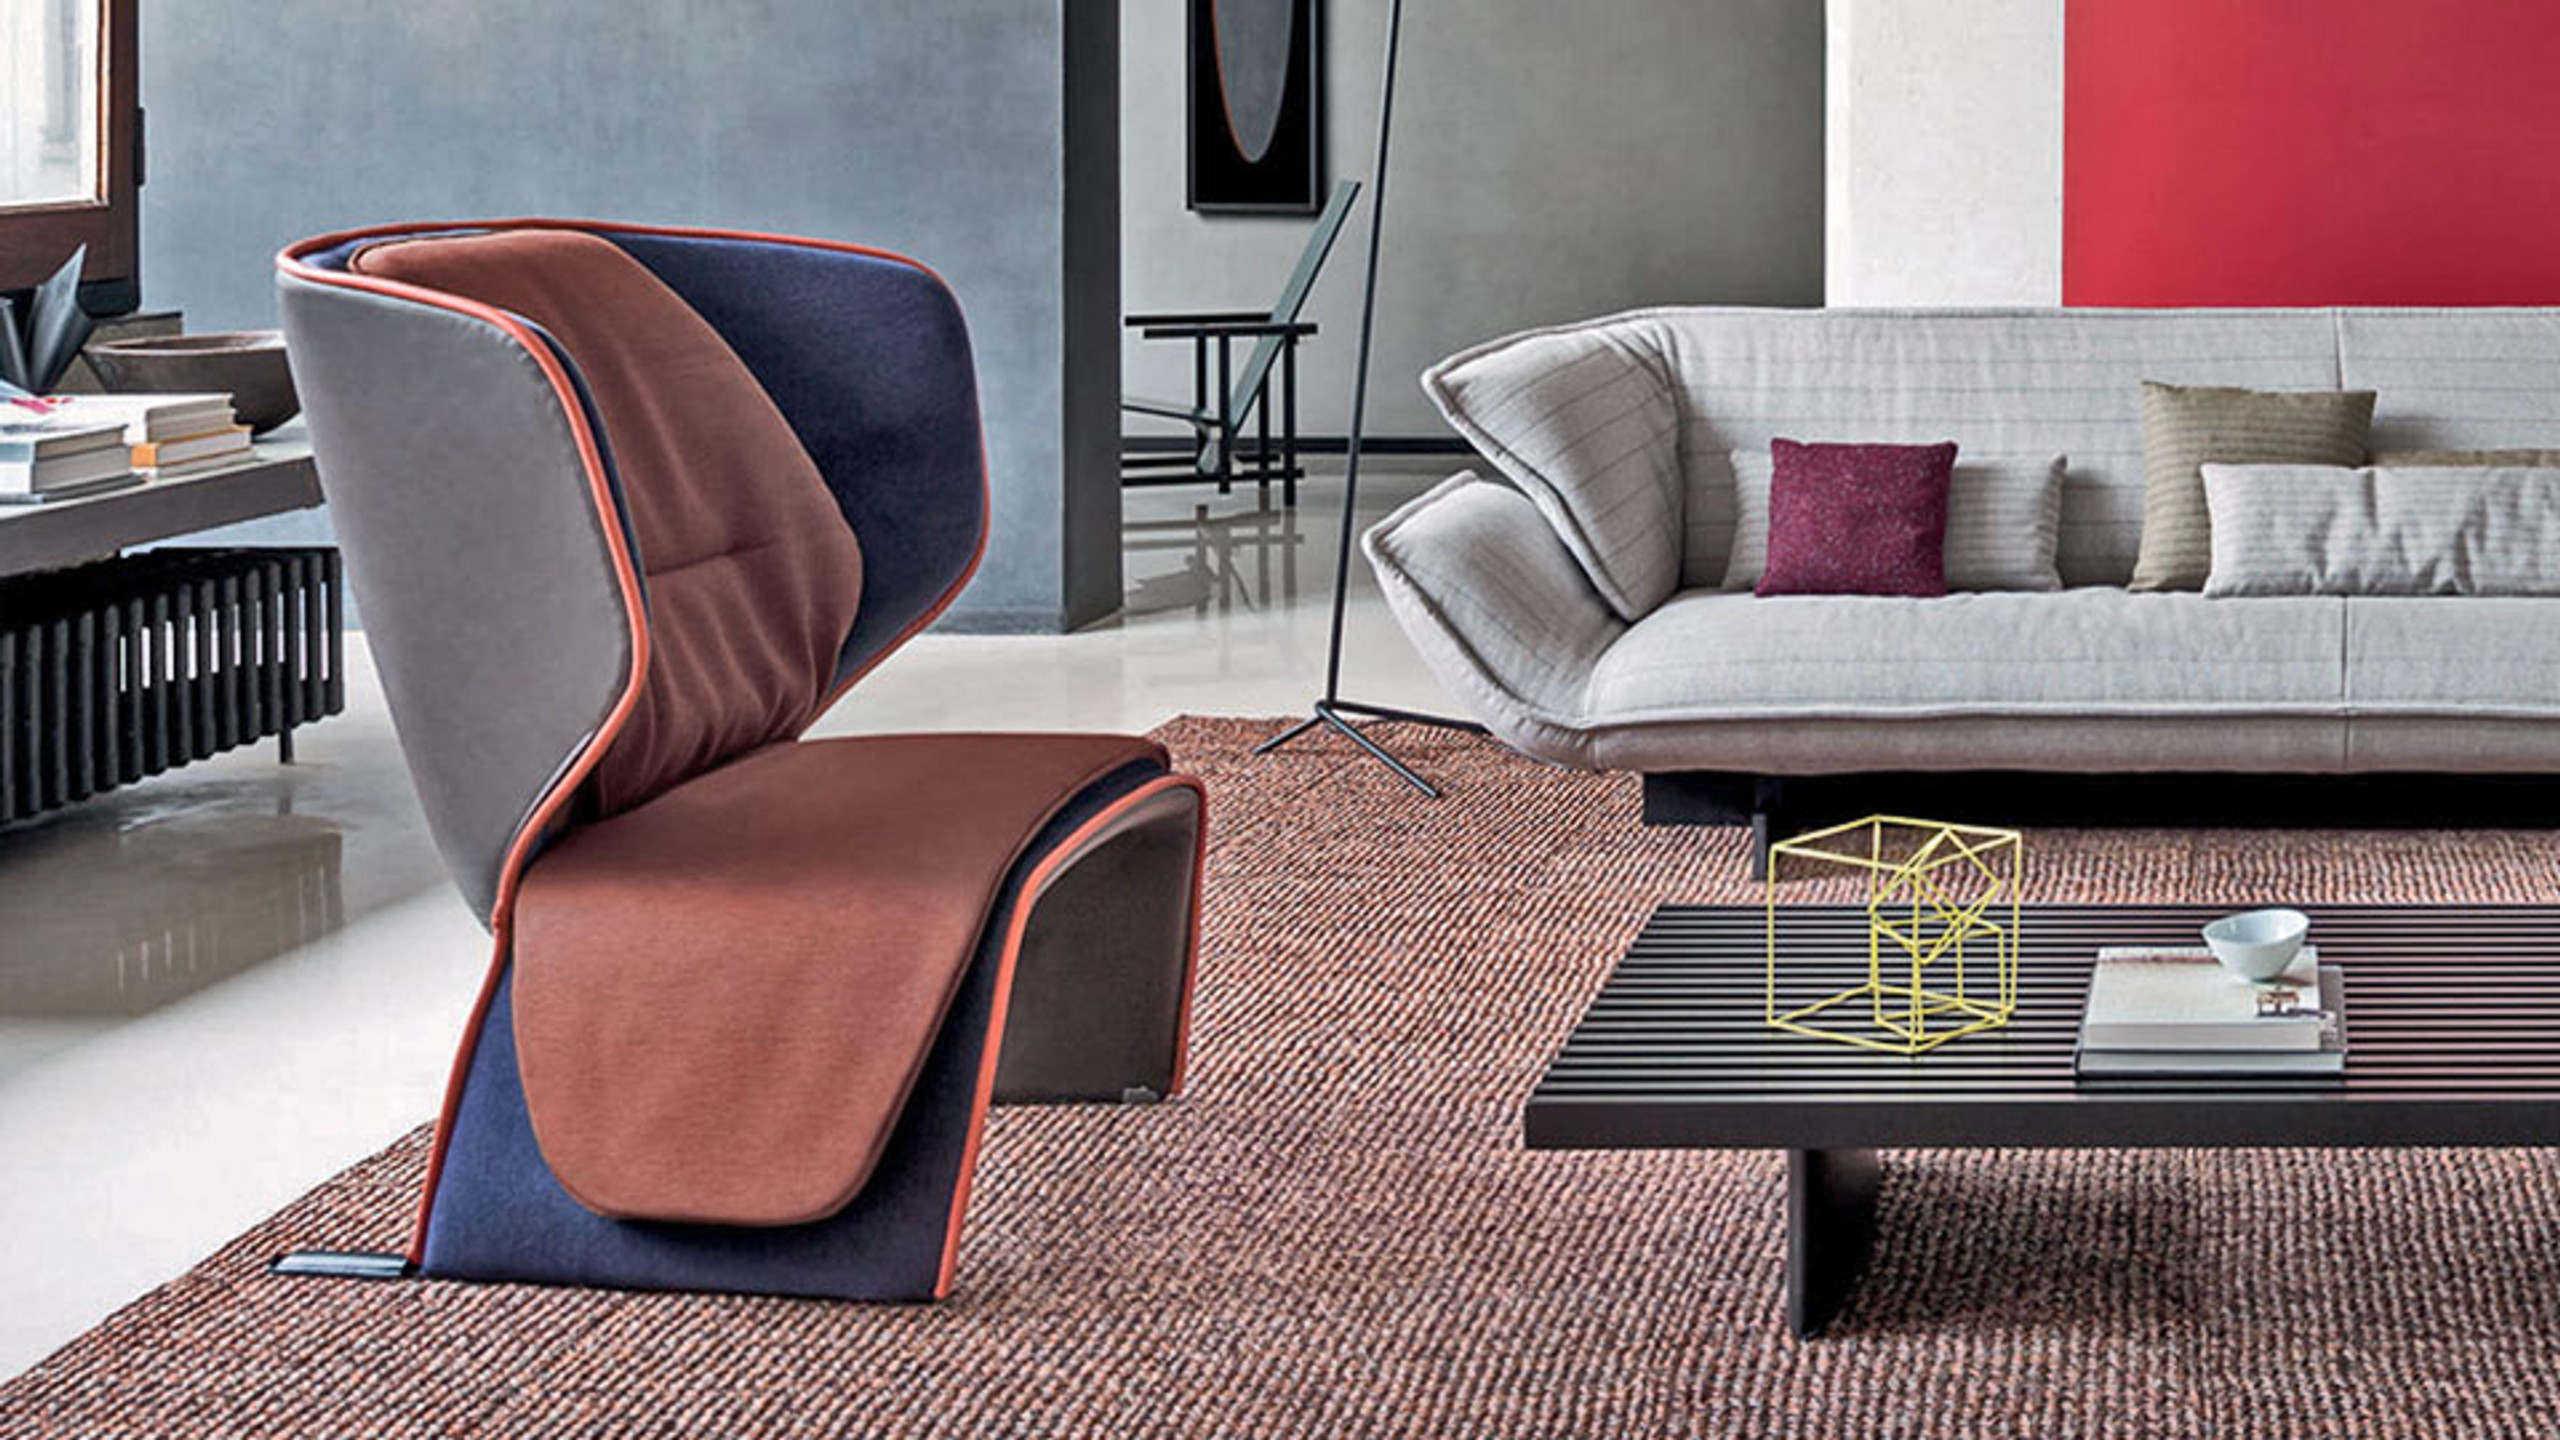 Milan 2016: New Cassina Collection by Patricia Urquiola